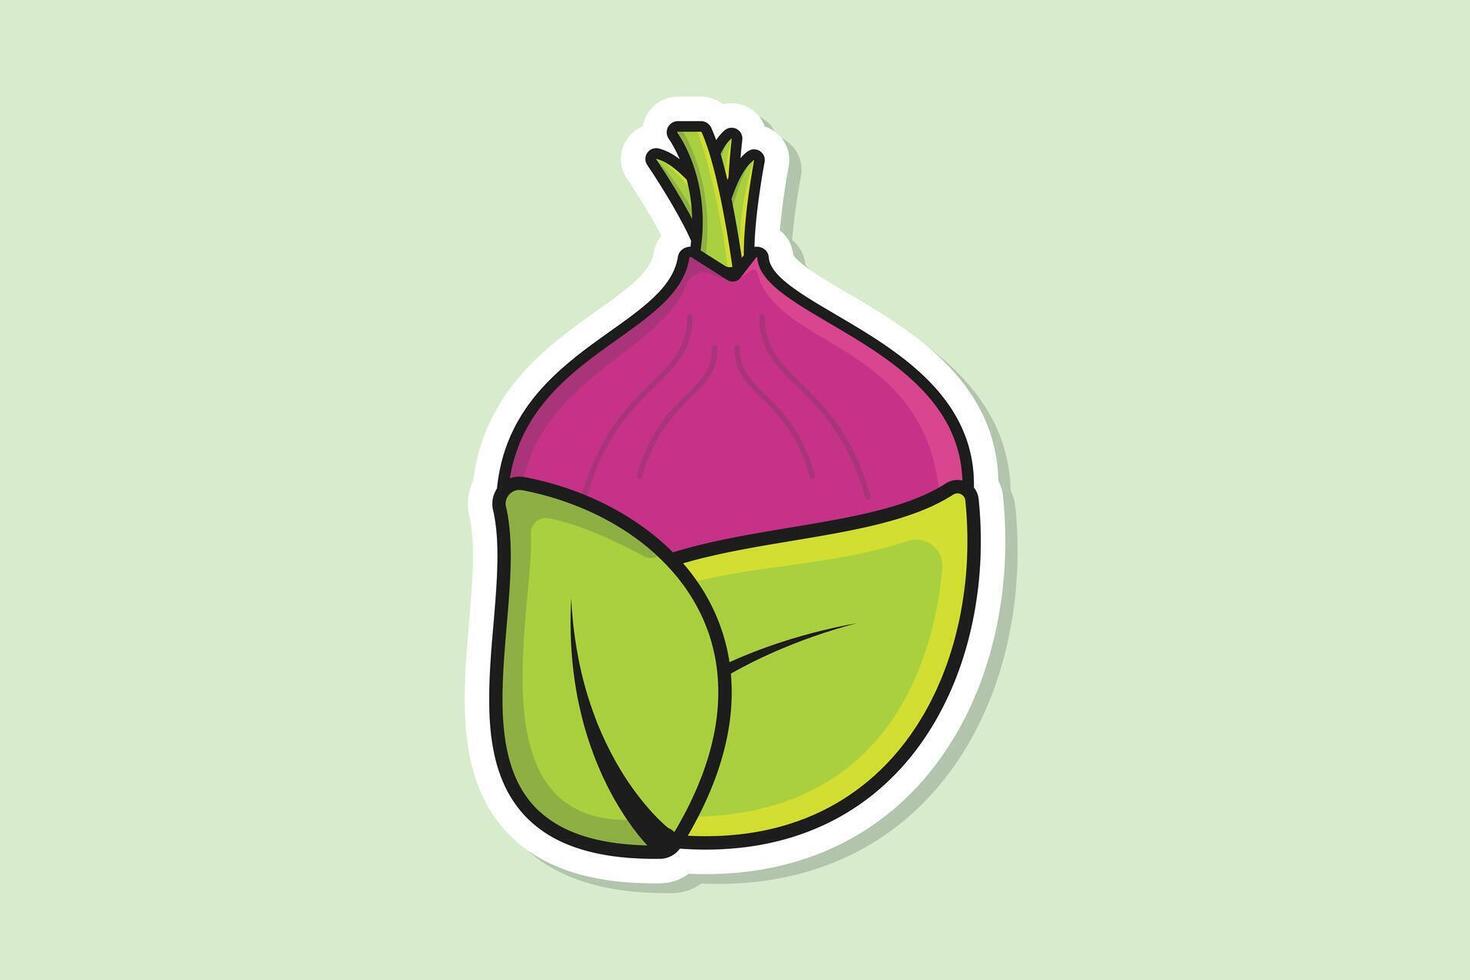 Onion vegetable with Green Leaves Sticker design vector illustration. Food nature icon concept. Creative Onion and organic leaves sticker design logo icons with shadow.